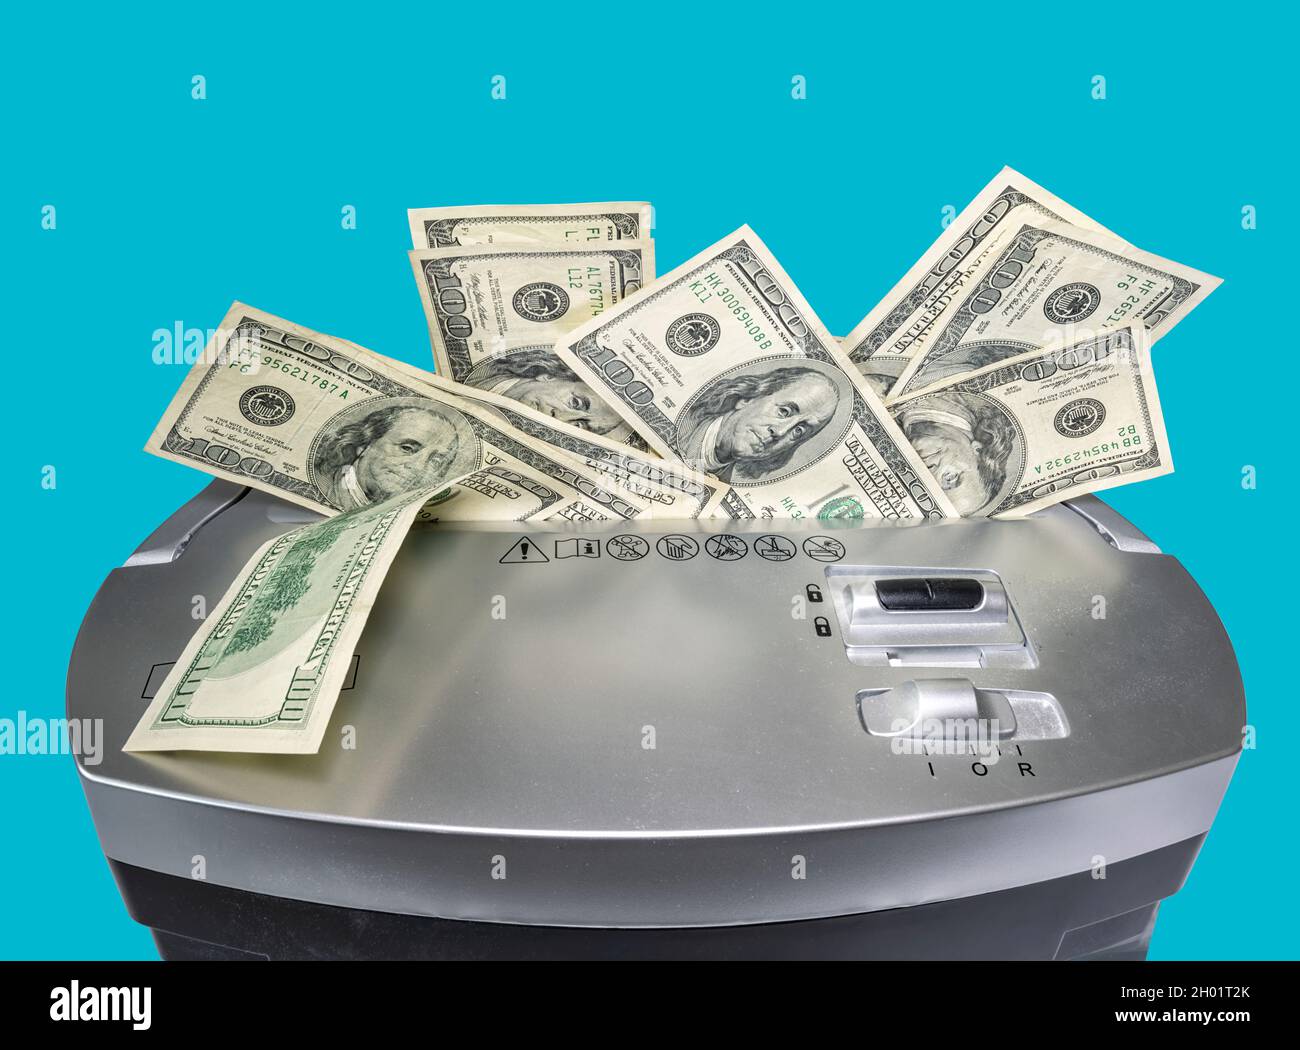 Concept photo of a 100 dollar bills being shredded by a paper shredder depicting the weakened dollar value. Isolated on solid blue background. Clippin Stock Photo